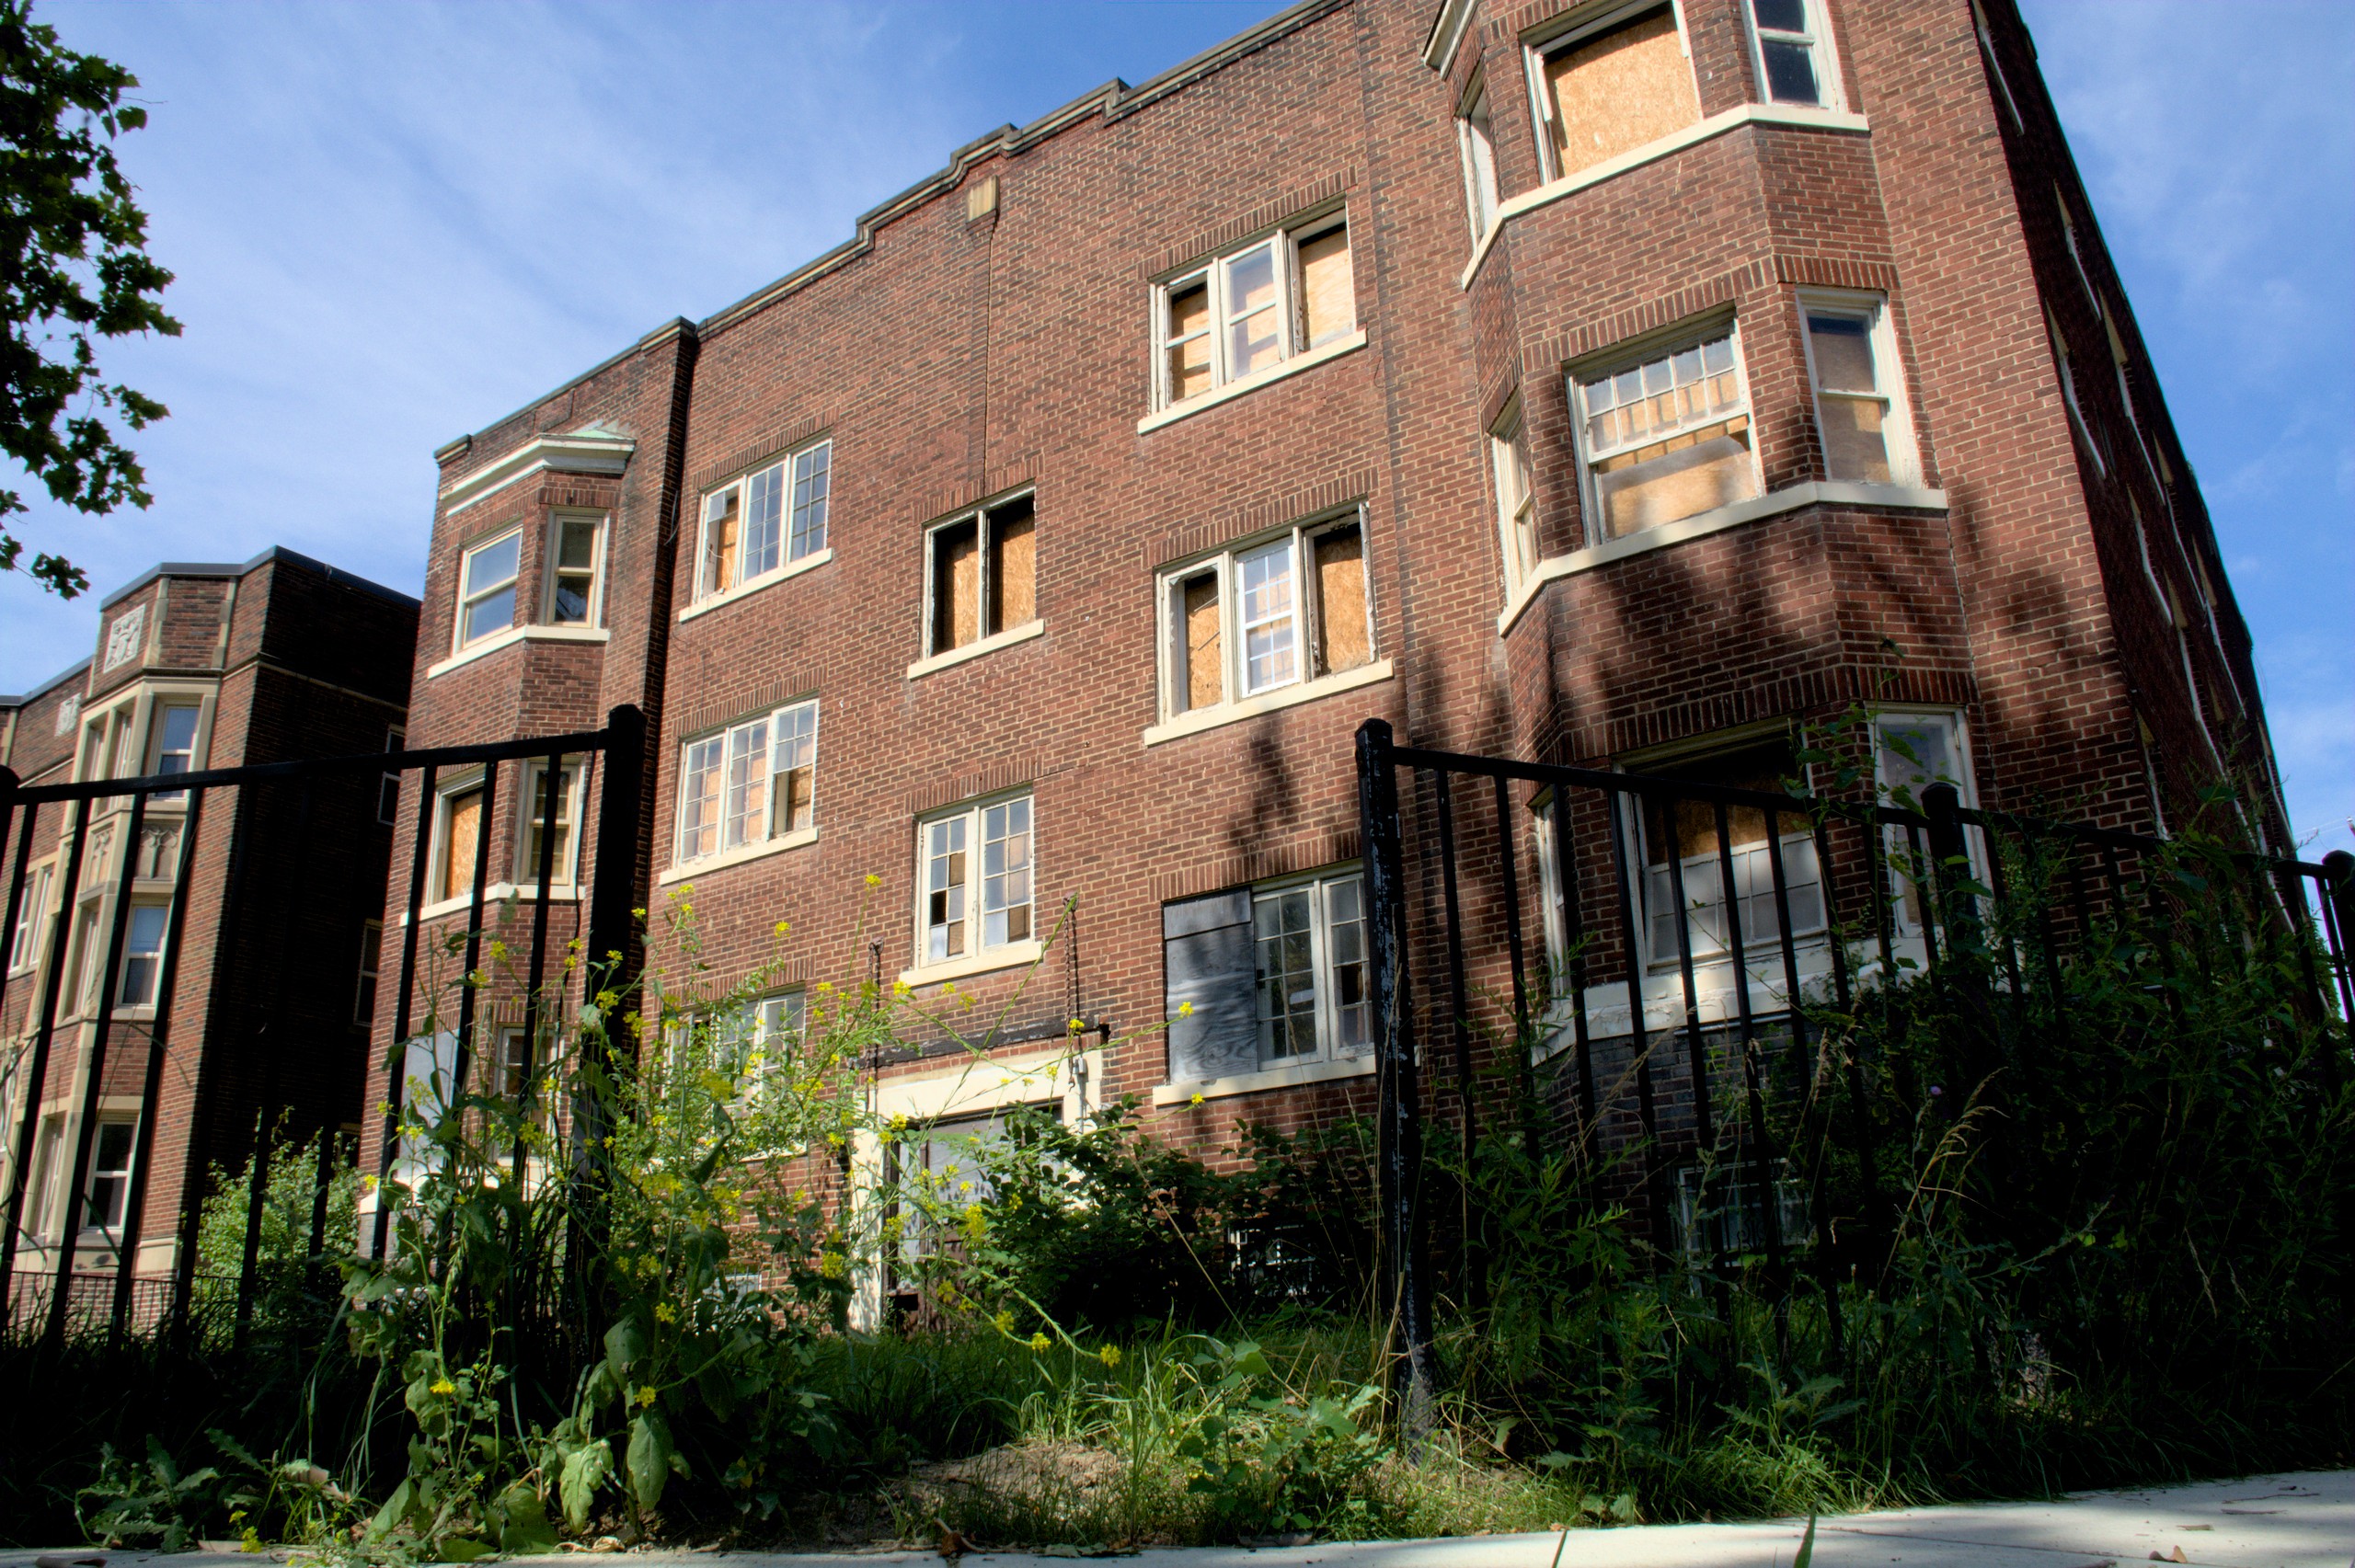 The City of Cleveland has gone to court over a vacant apartment building at 2862 S. Moreland Boulevard.